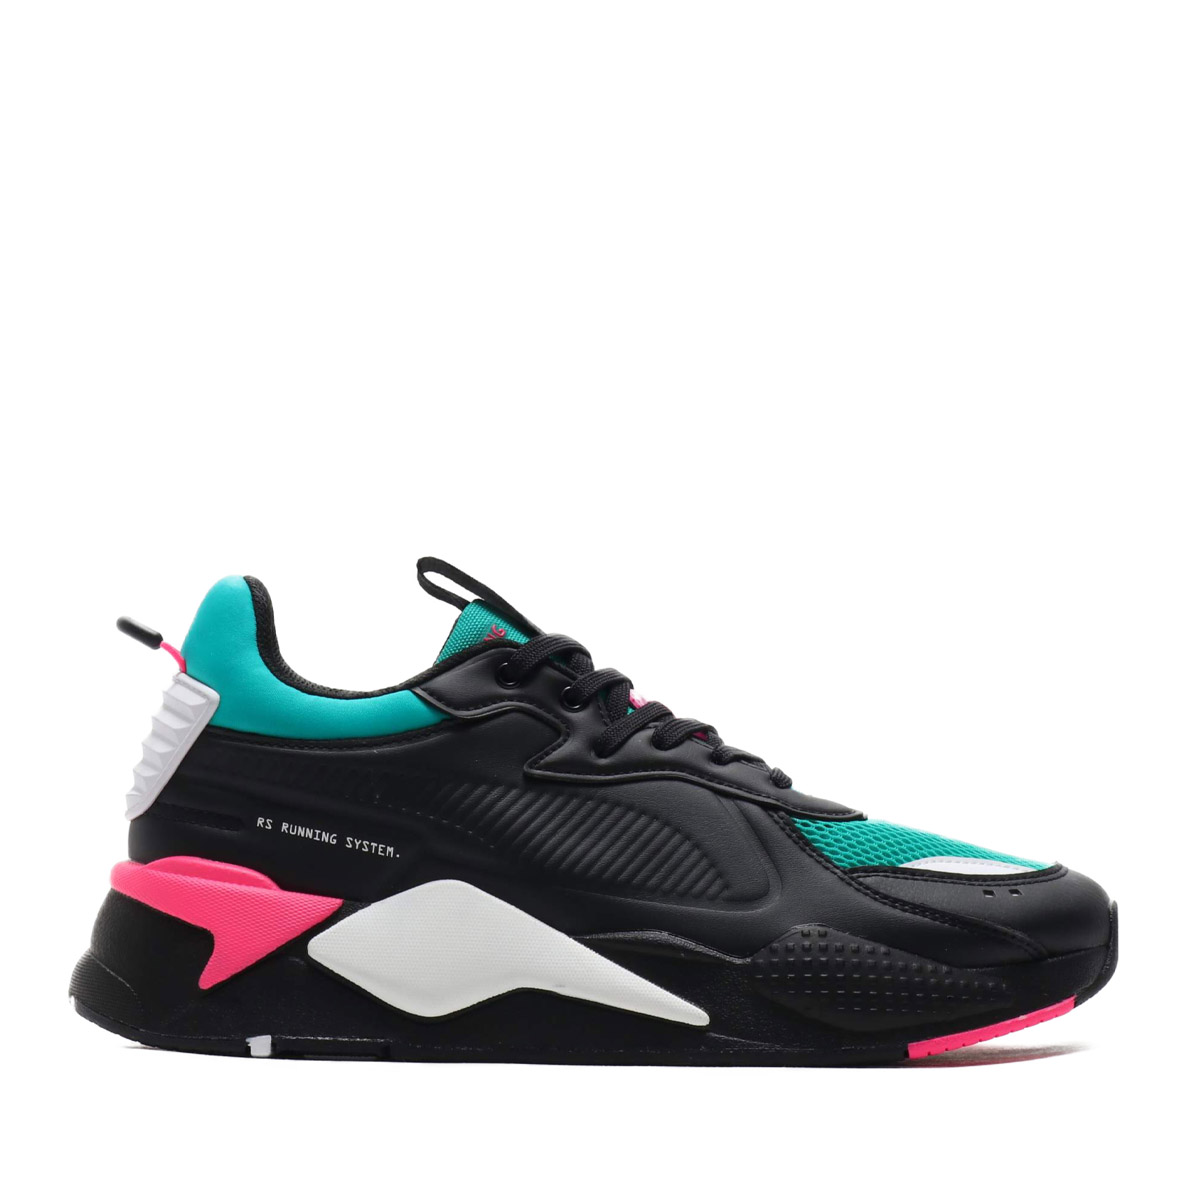 buy \u003e puma rs running system, Up to 79% OFF